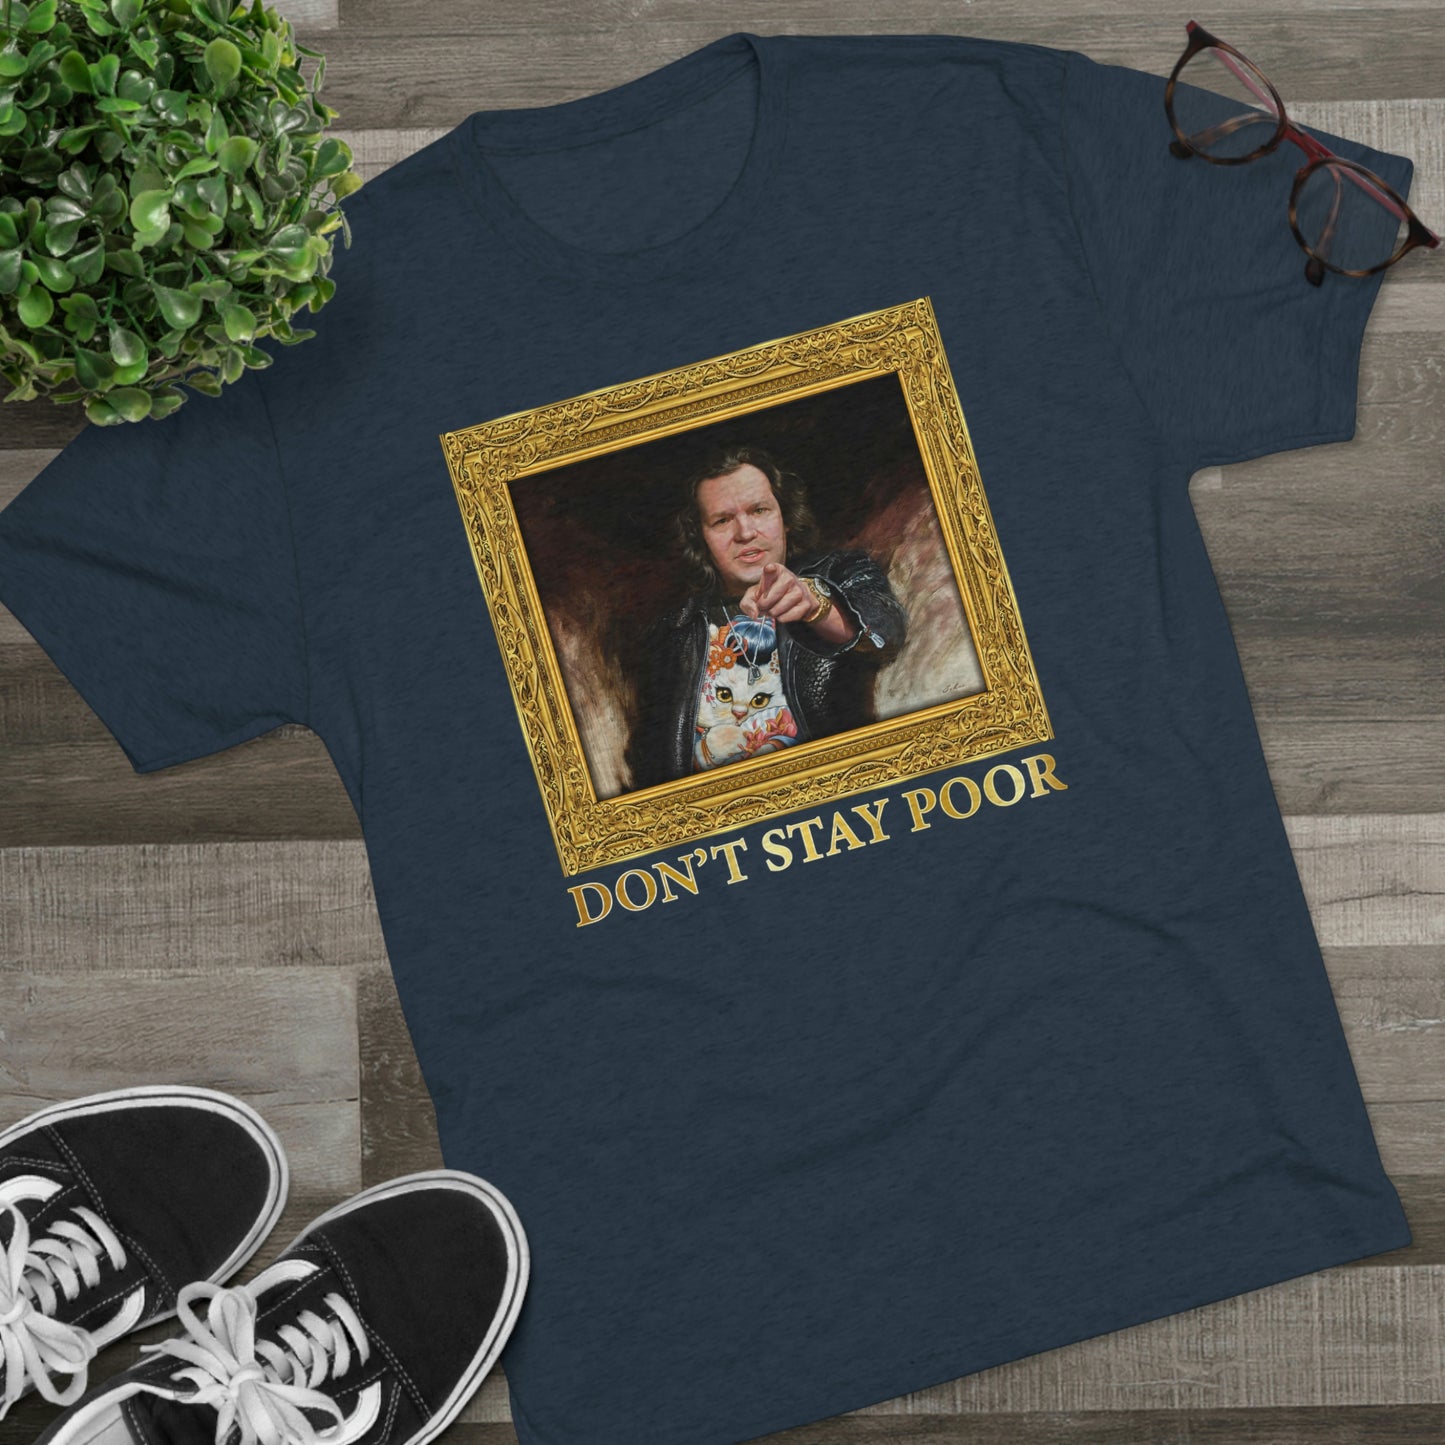 The Painting - Don't Stay Poor - Unisex Tri-Blend Crew T-Shirt